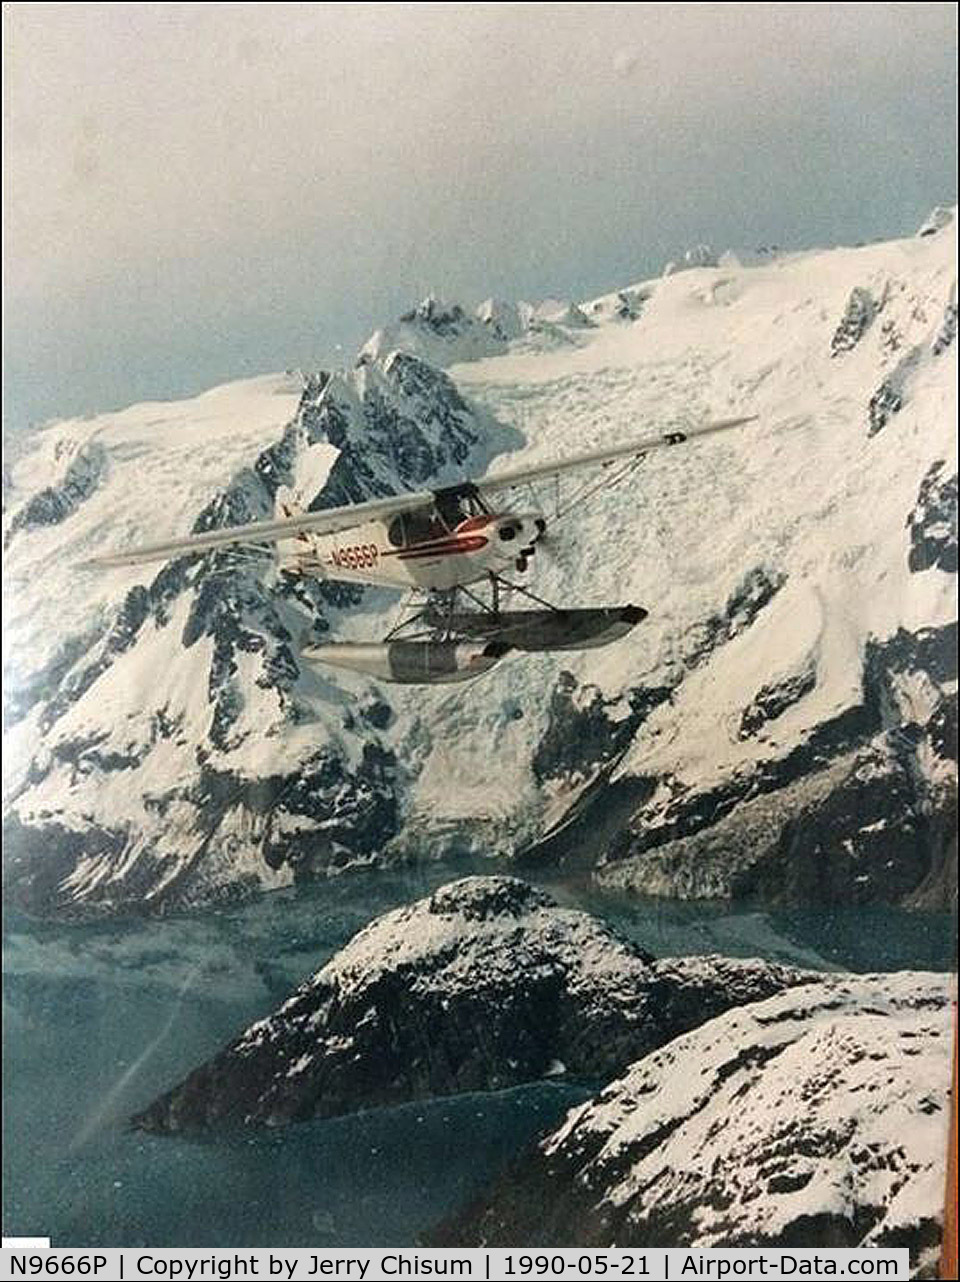 N9666P, 1974 Piper PA-18-150 Super Cub C/N 18-7509011, Me flying N666P east side of the Kenai Peninsula after the closure of the Alaska Togiak commercial herring fishery. The airplane was later sold to Kenmore Air Harbor. Photo taken from another Super Cub.  We were flying together back to Cordova AK